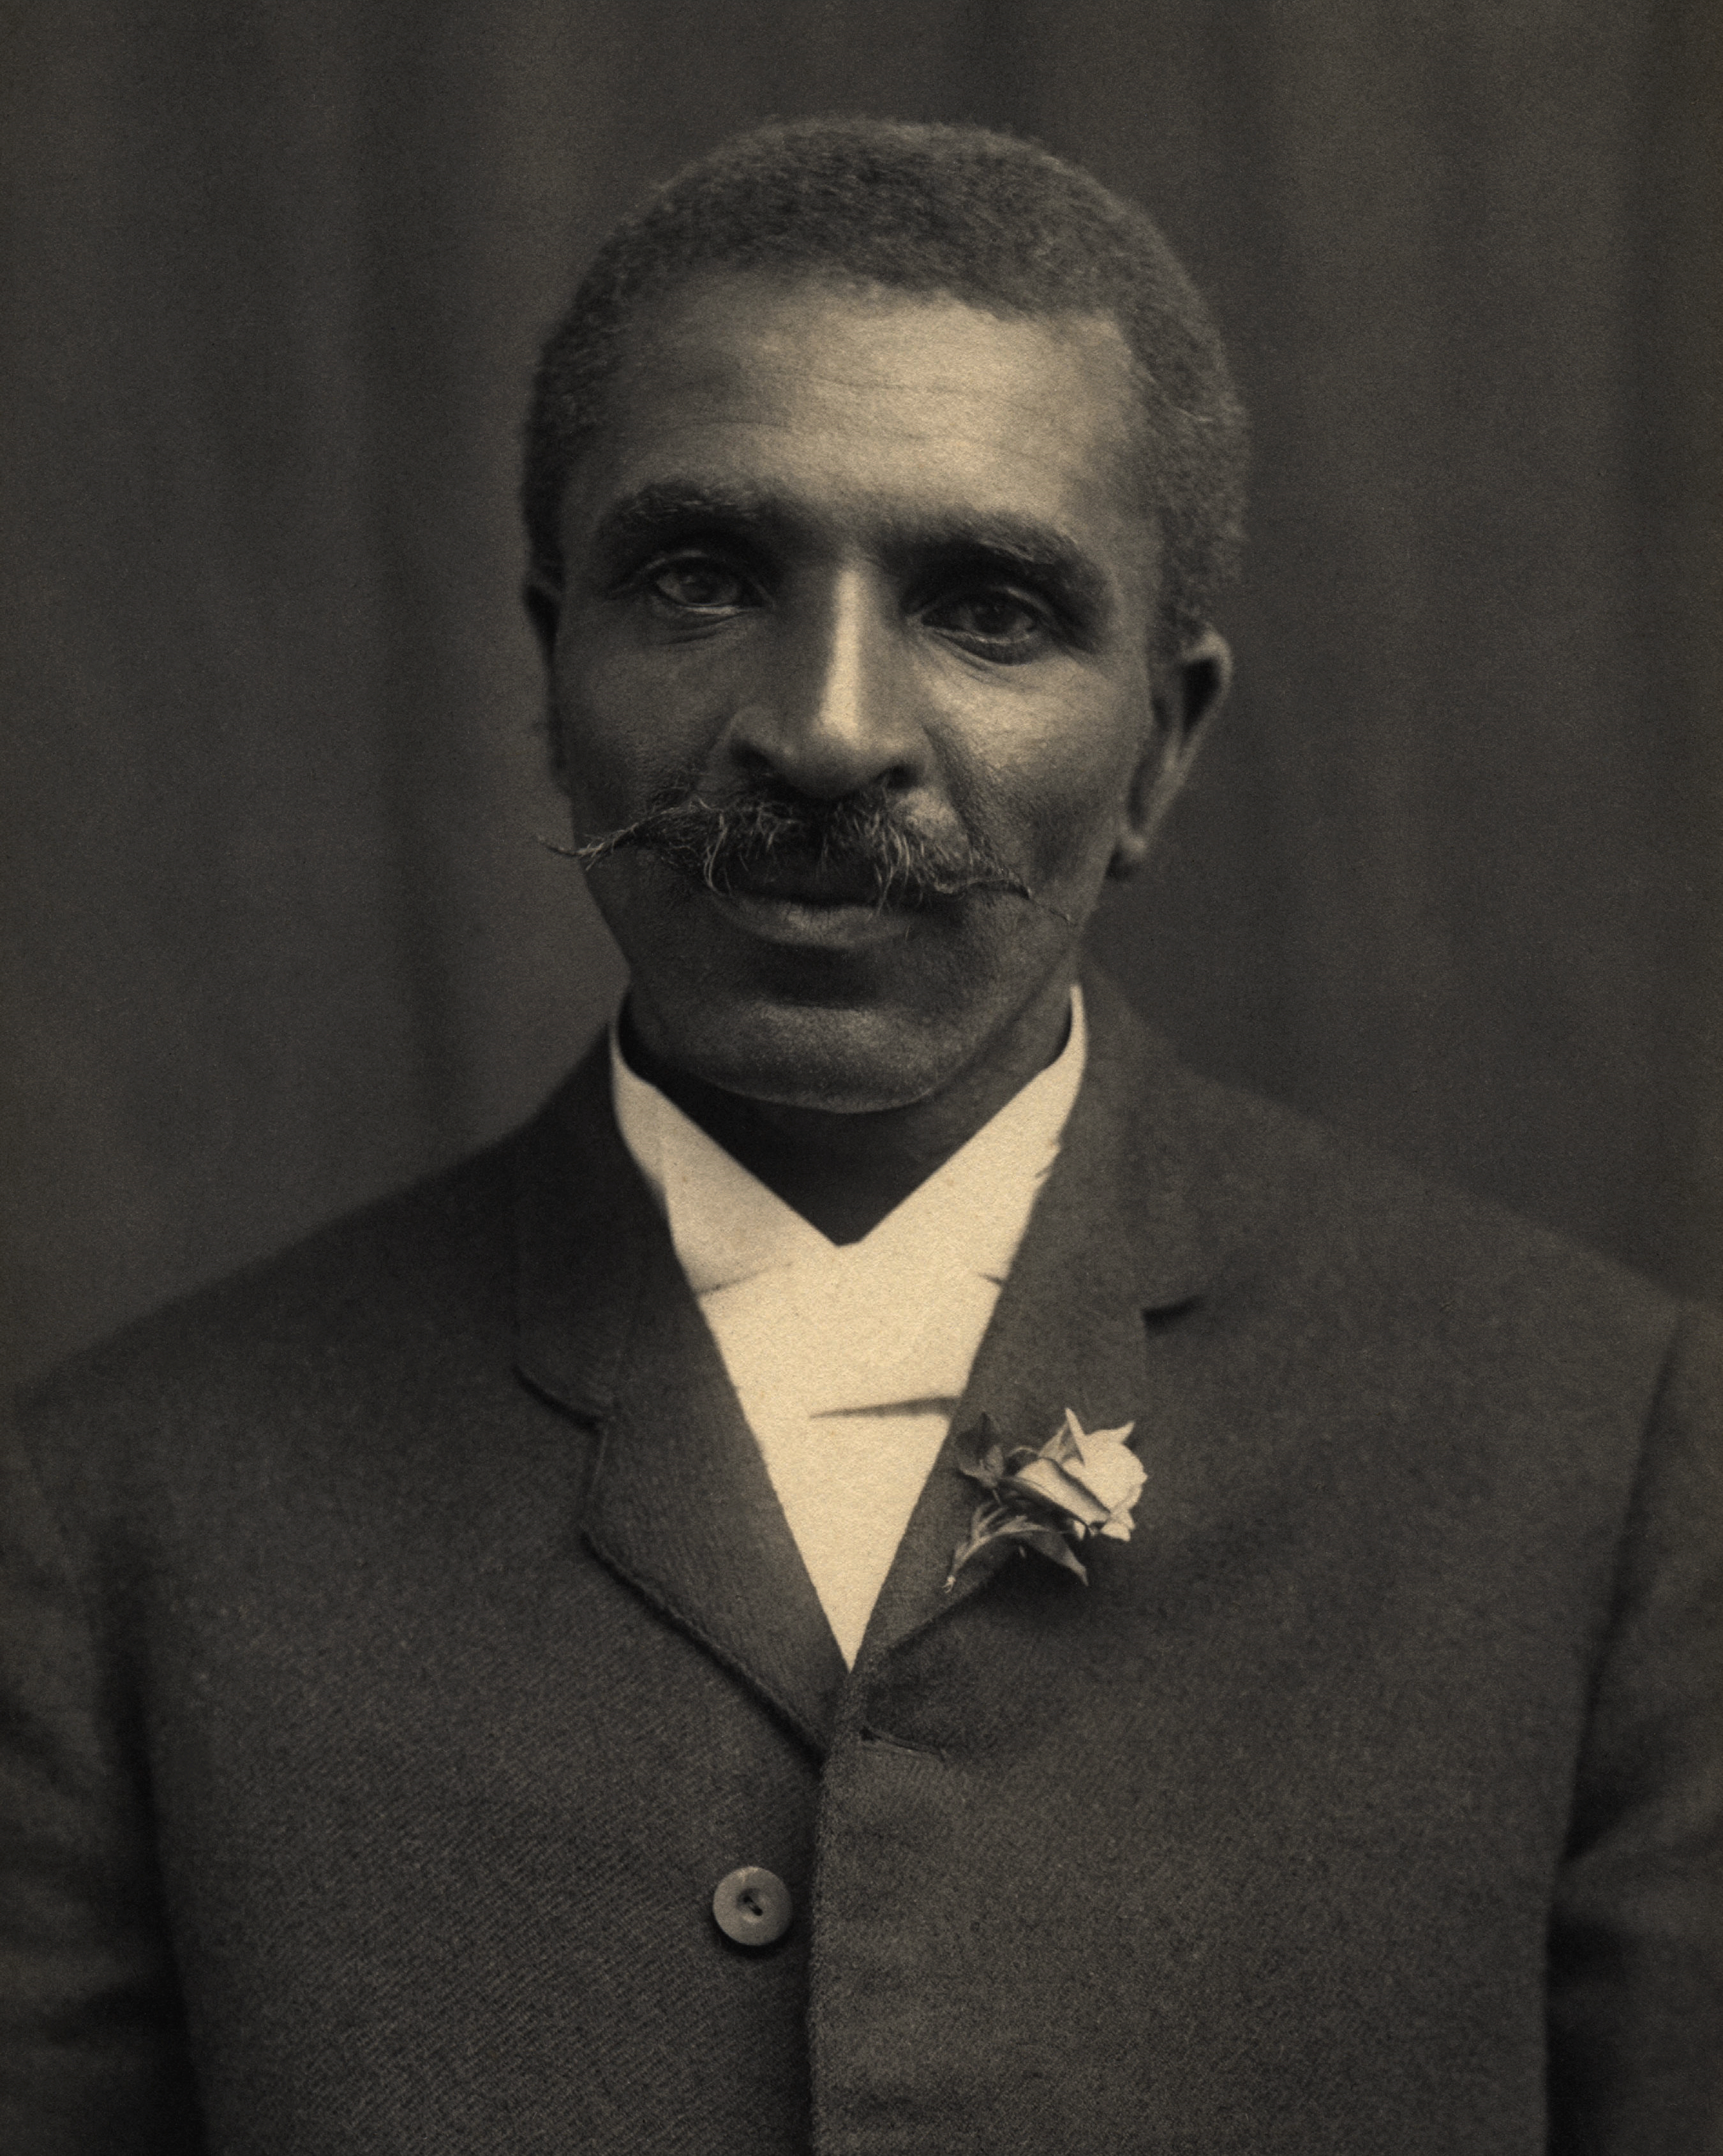 George Washington Carver (1860s – January 5, 1943) was an American agricultural scientist and inventor who promoted alternative crops to cotton and methods to prevent soil depletion. He was the most prominent black scientist of the early 20th century. Apart from his work to improve the lives of farmers, Carver was also a leader in promoting environmentalism. He received numerous honors for his work, including the Spingarn Medal of the NAACP. In an era of high racial polarization, his fame reached beyond the black community. He was widely recognized and praised in the white community for his many achievements and talents. In 1941, Time magazine dubbed Carver a “Black Leonardo”.